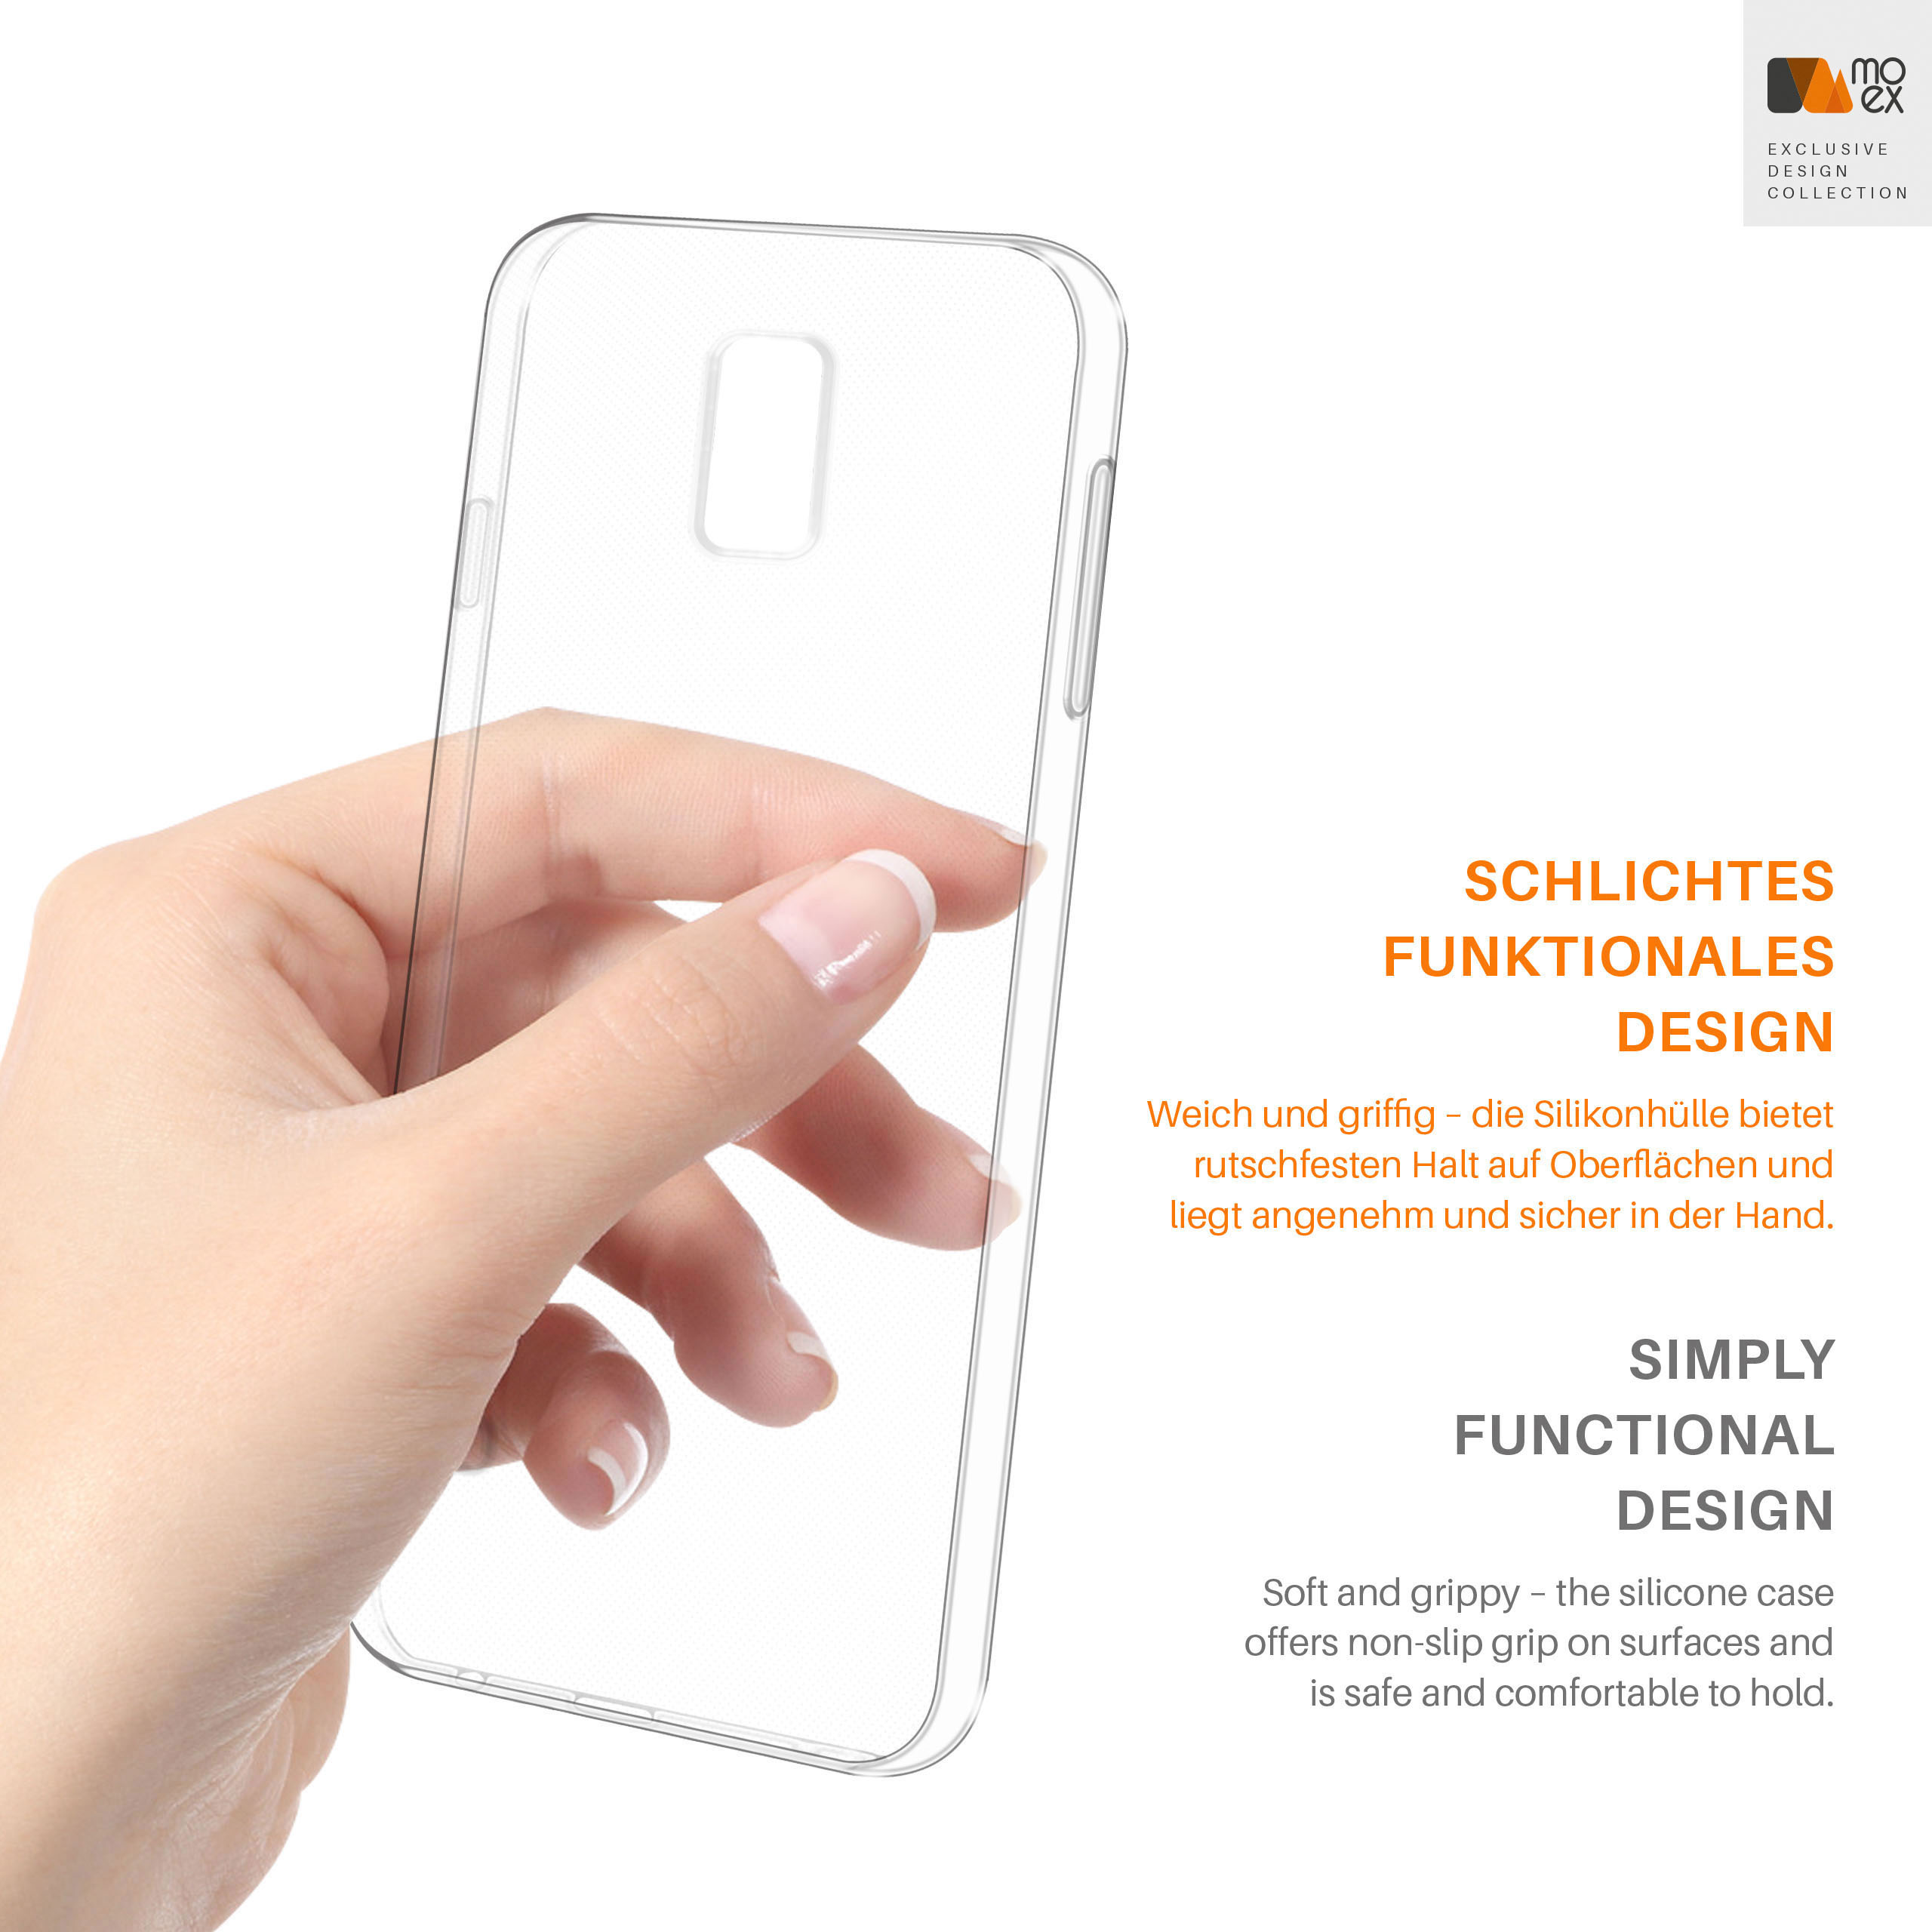 Neo, Backcover, Aero S5 S5 / Crystal-Clear Samsung, Galaxy MOEX Case,